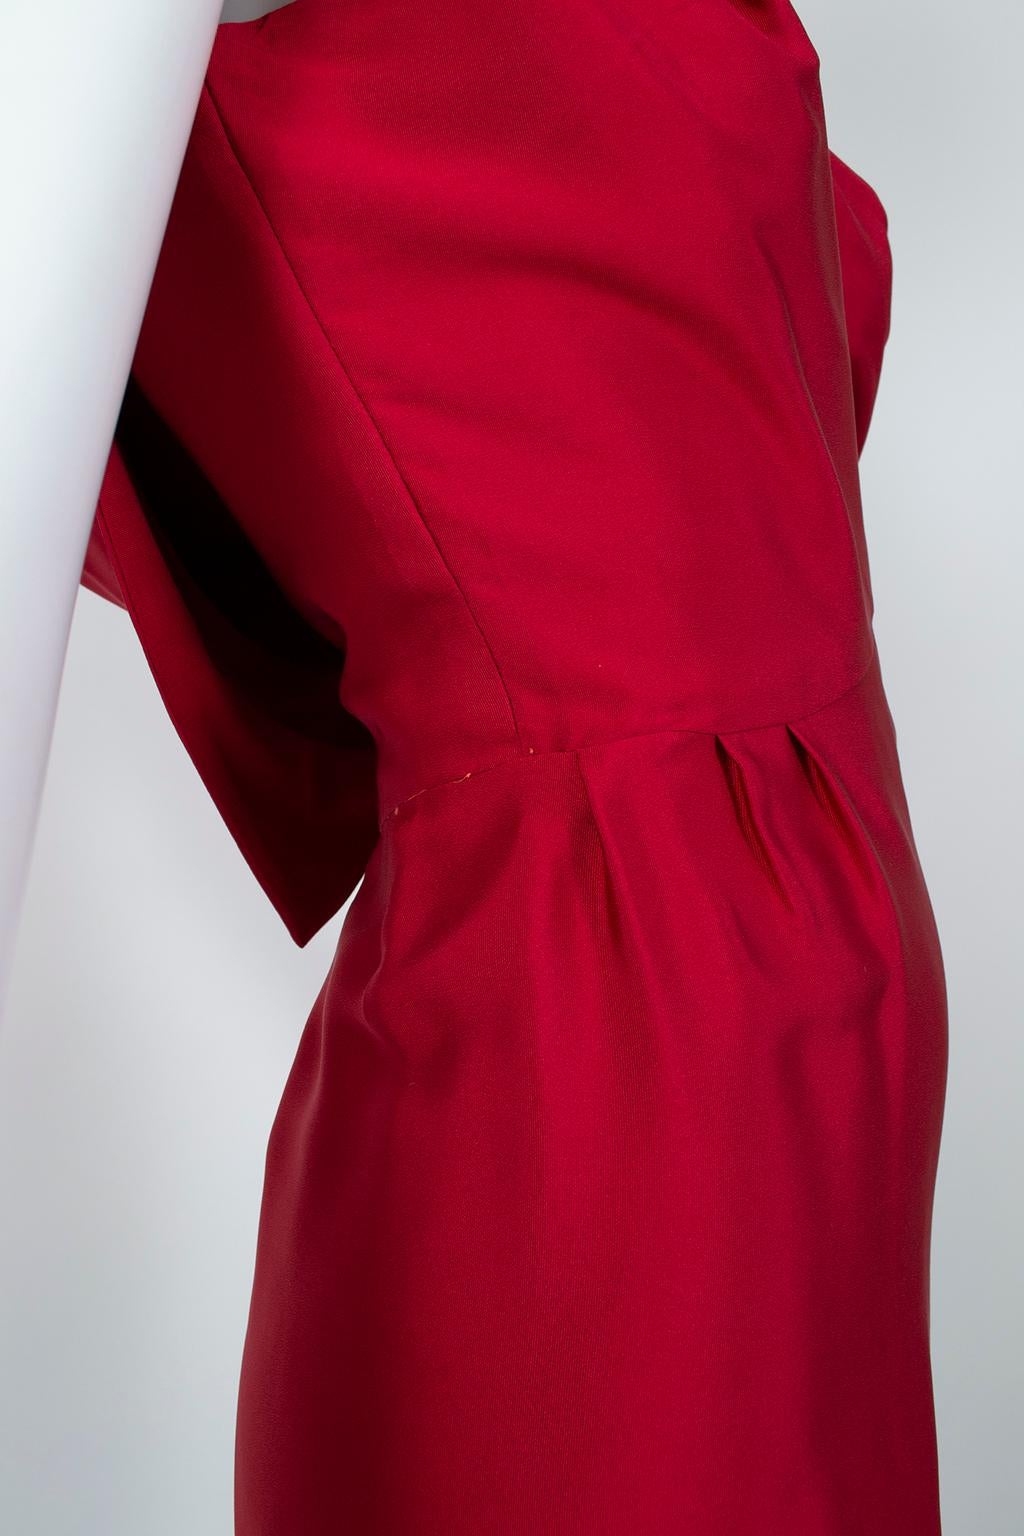 Women's Lipstick Red Silk *Larger Size* Sheath Dress w Convertible Scarf Back - L, 1960s For Sale